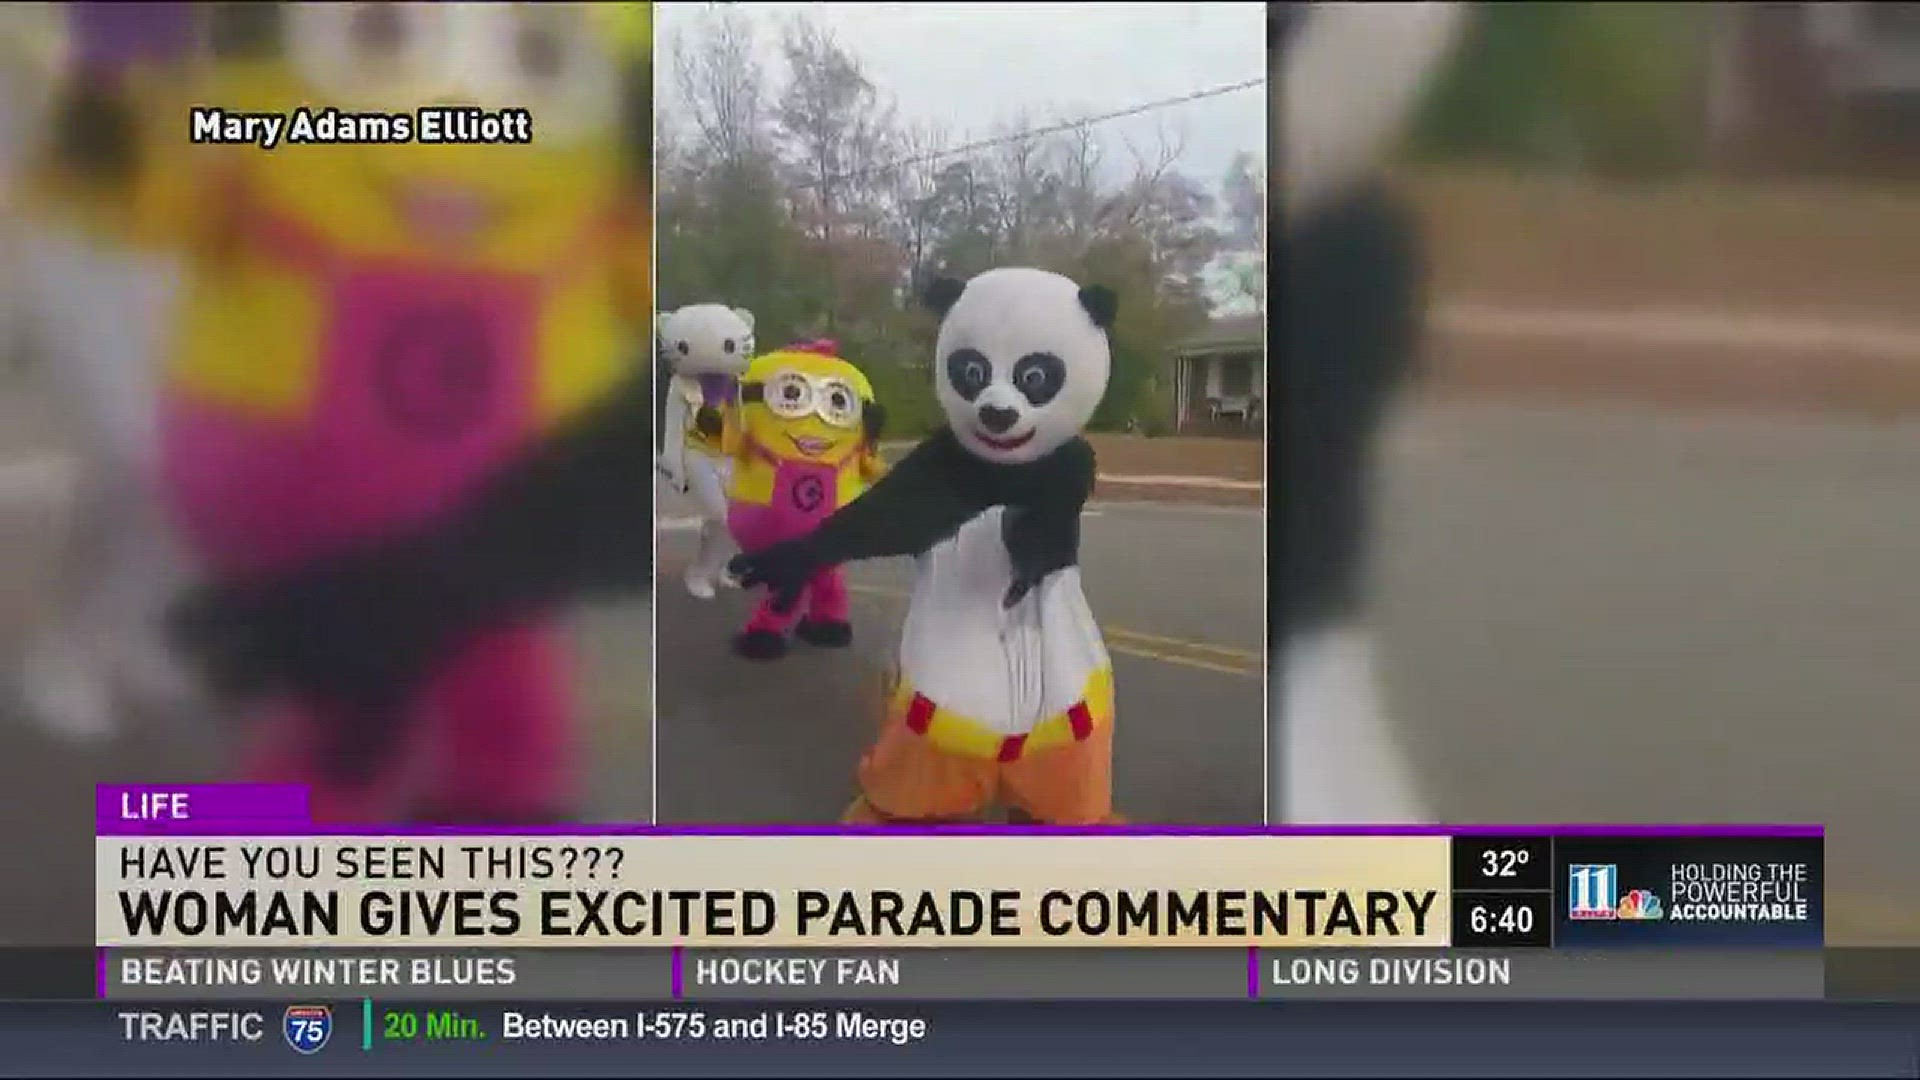 Woman gives excited parade commentary as panda breaks it down.